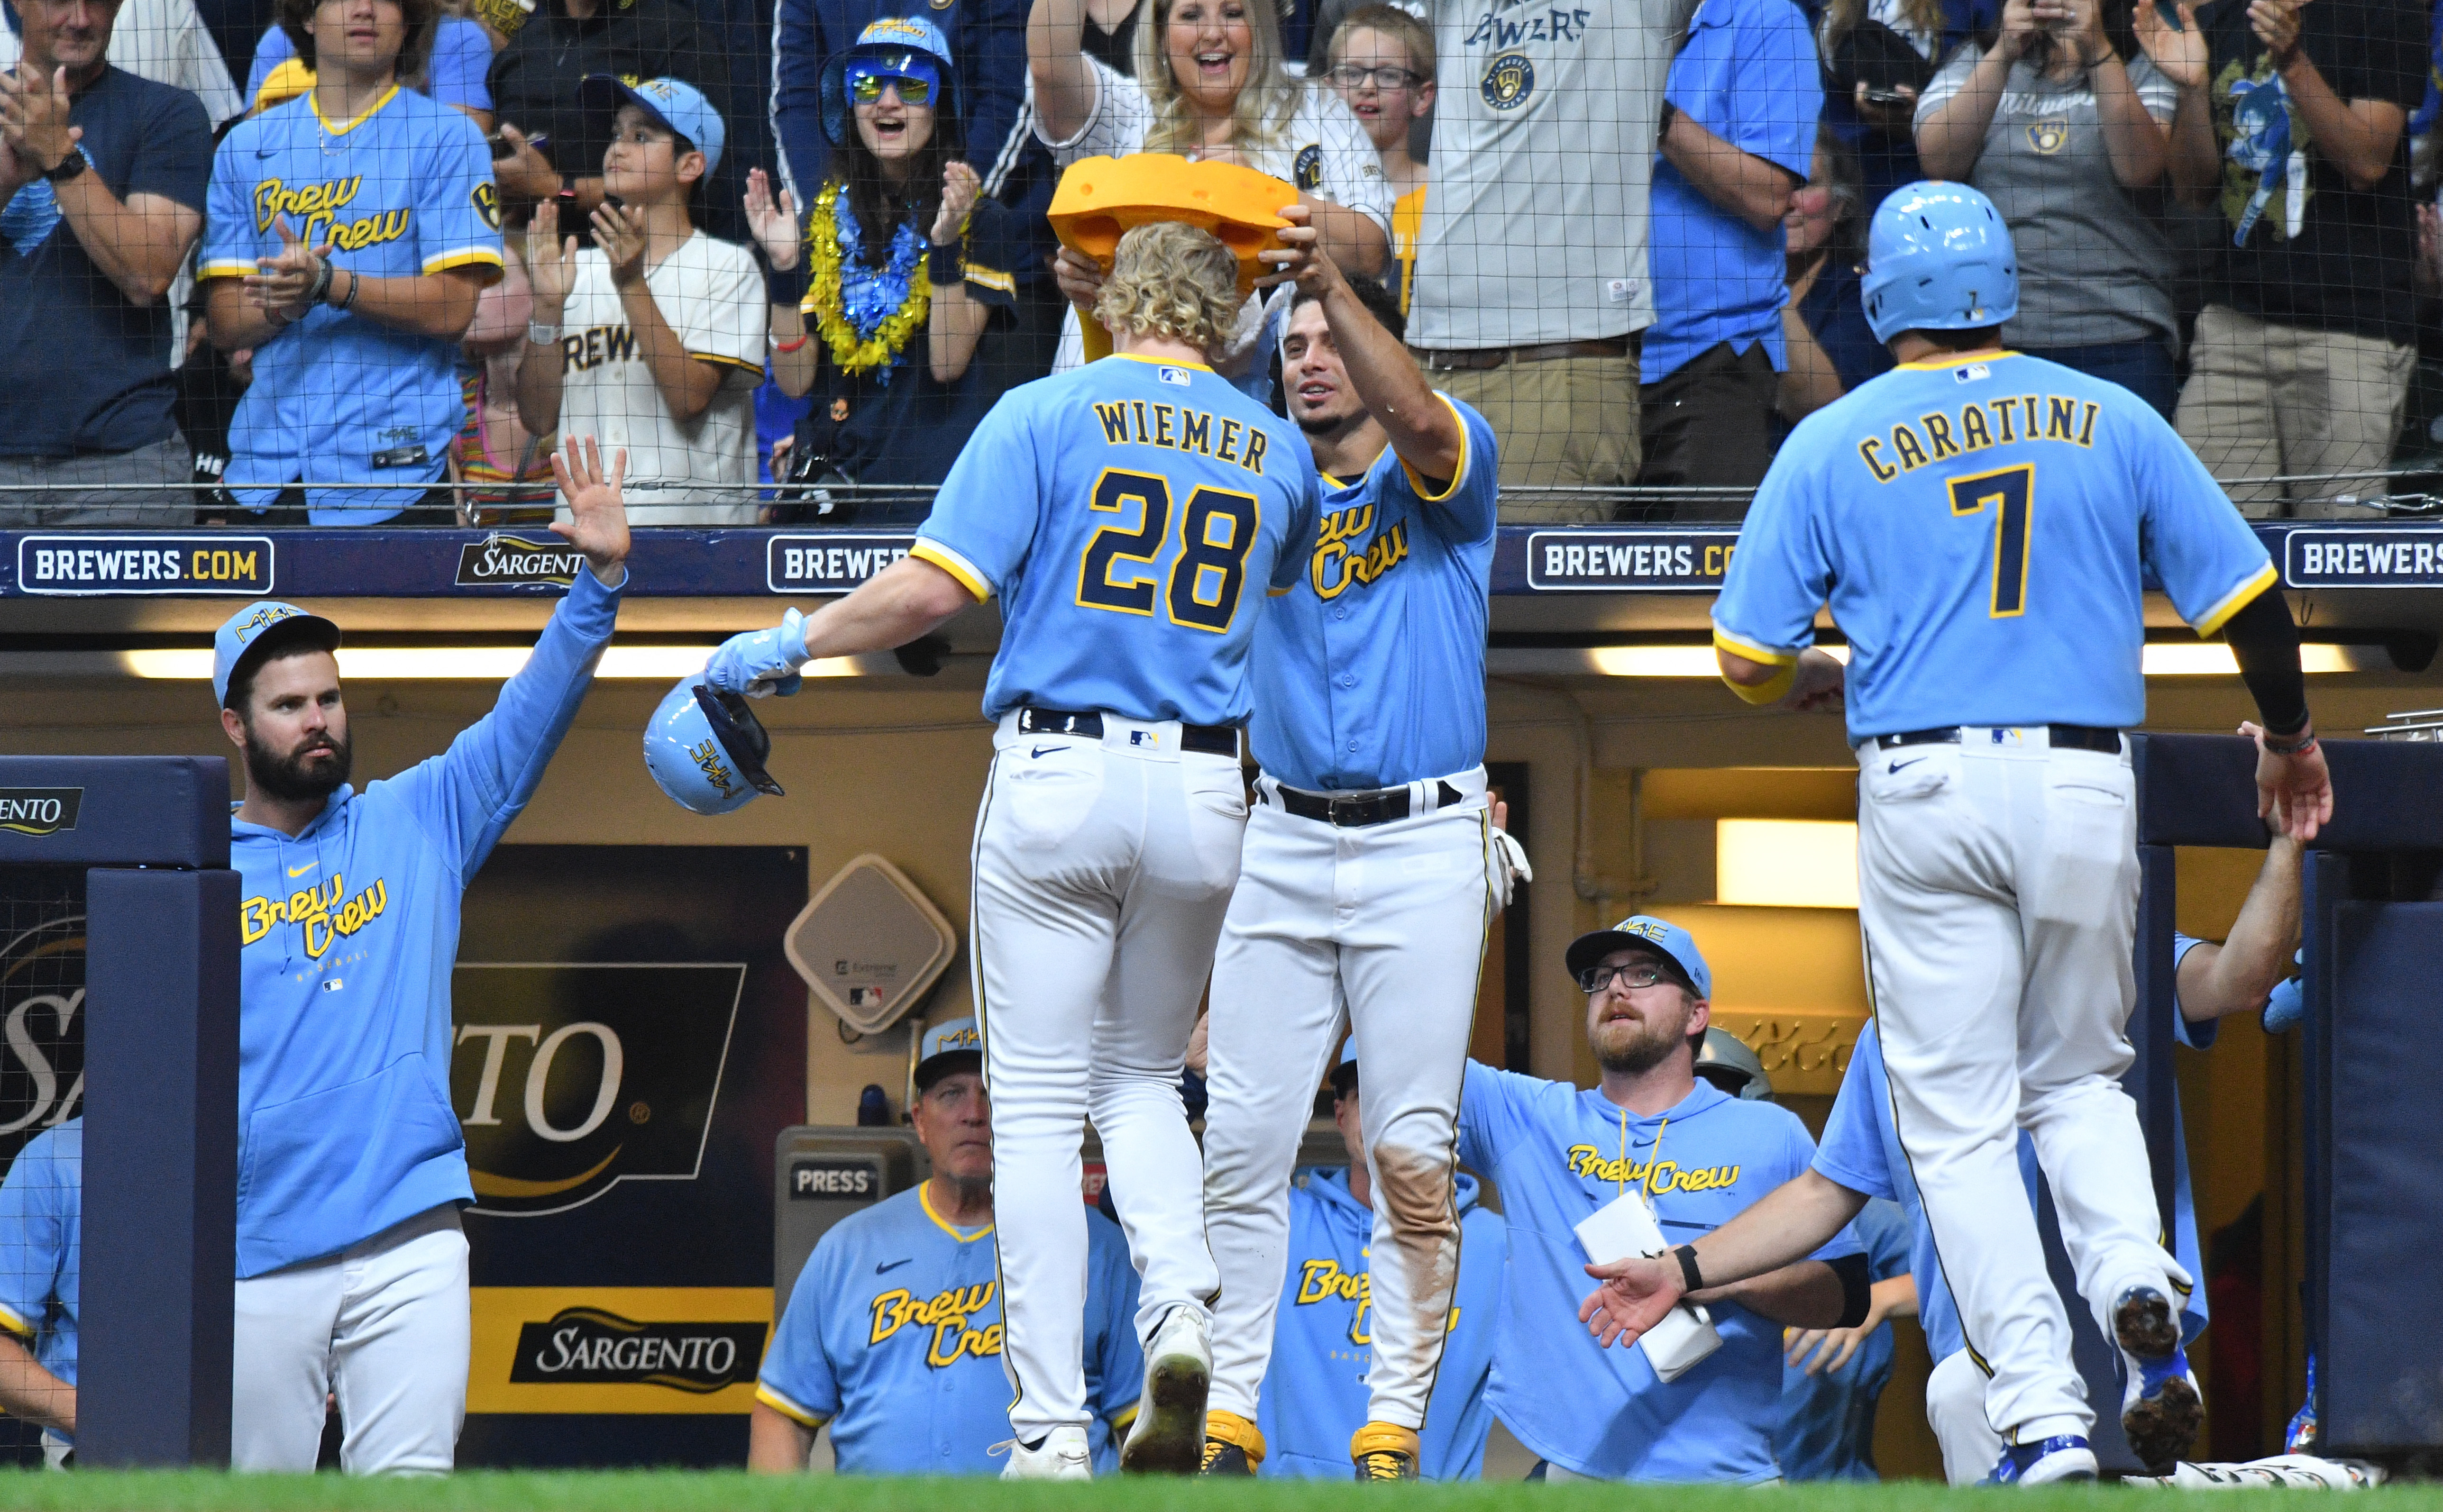 Wiemer, Adames, Burnes carry Brewers to 7-3 win over NL Central-leading Reds